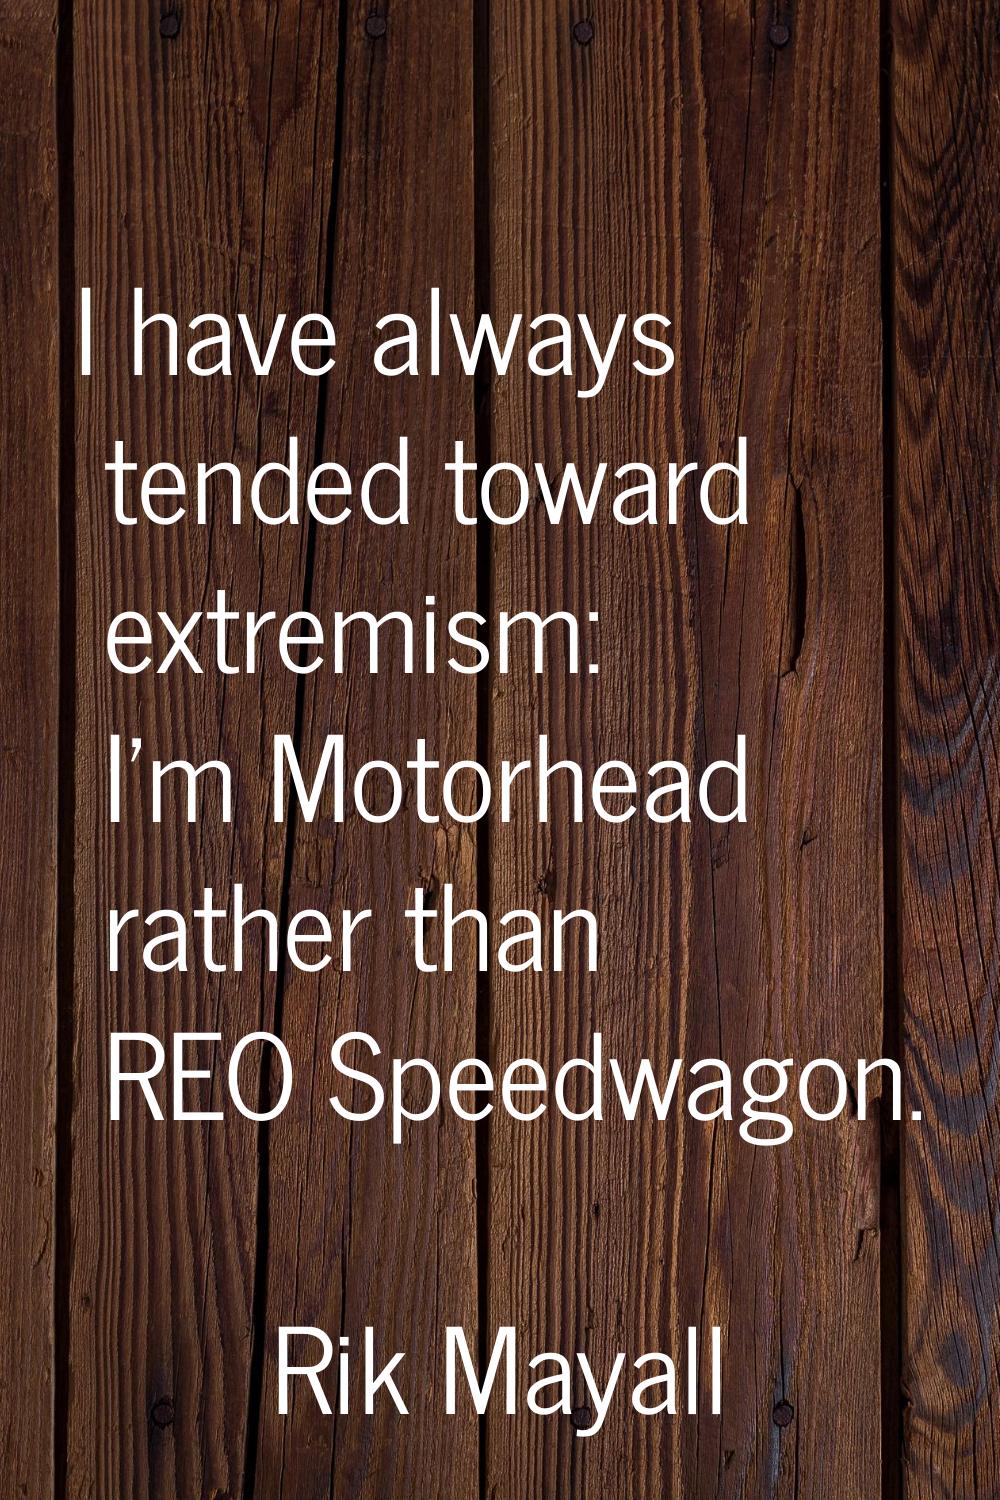 I have always tended toward extremism: I'm Motorhead rather than REO Speedwagon.